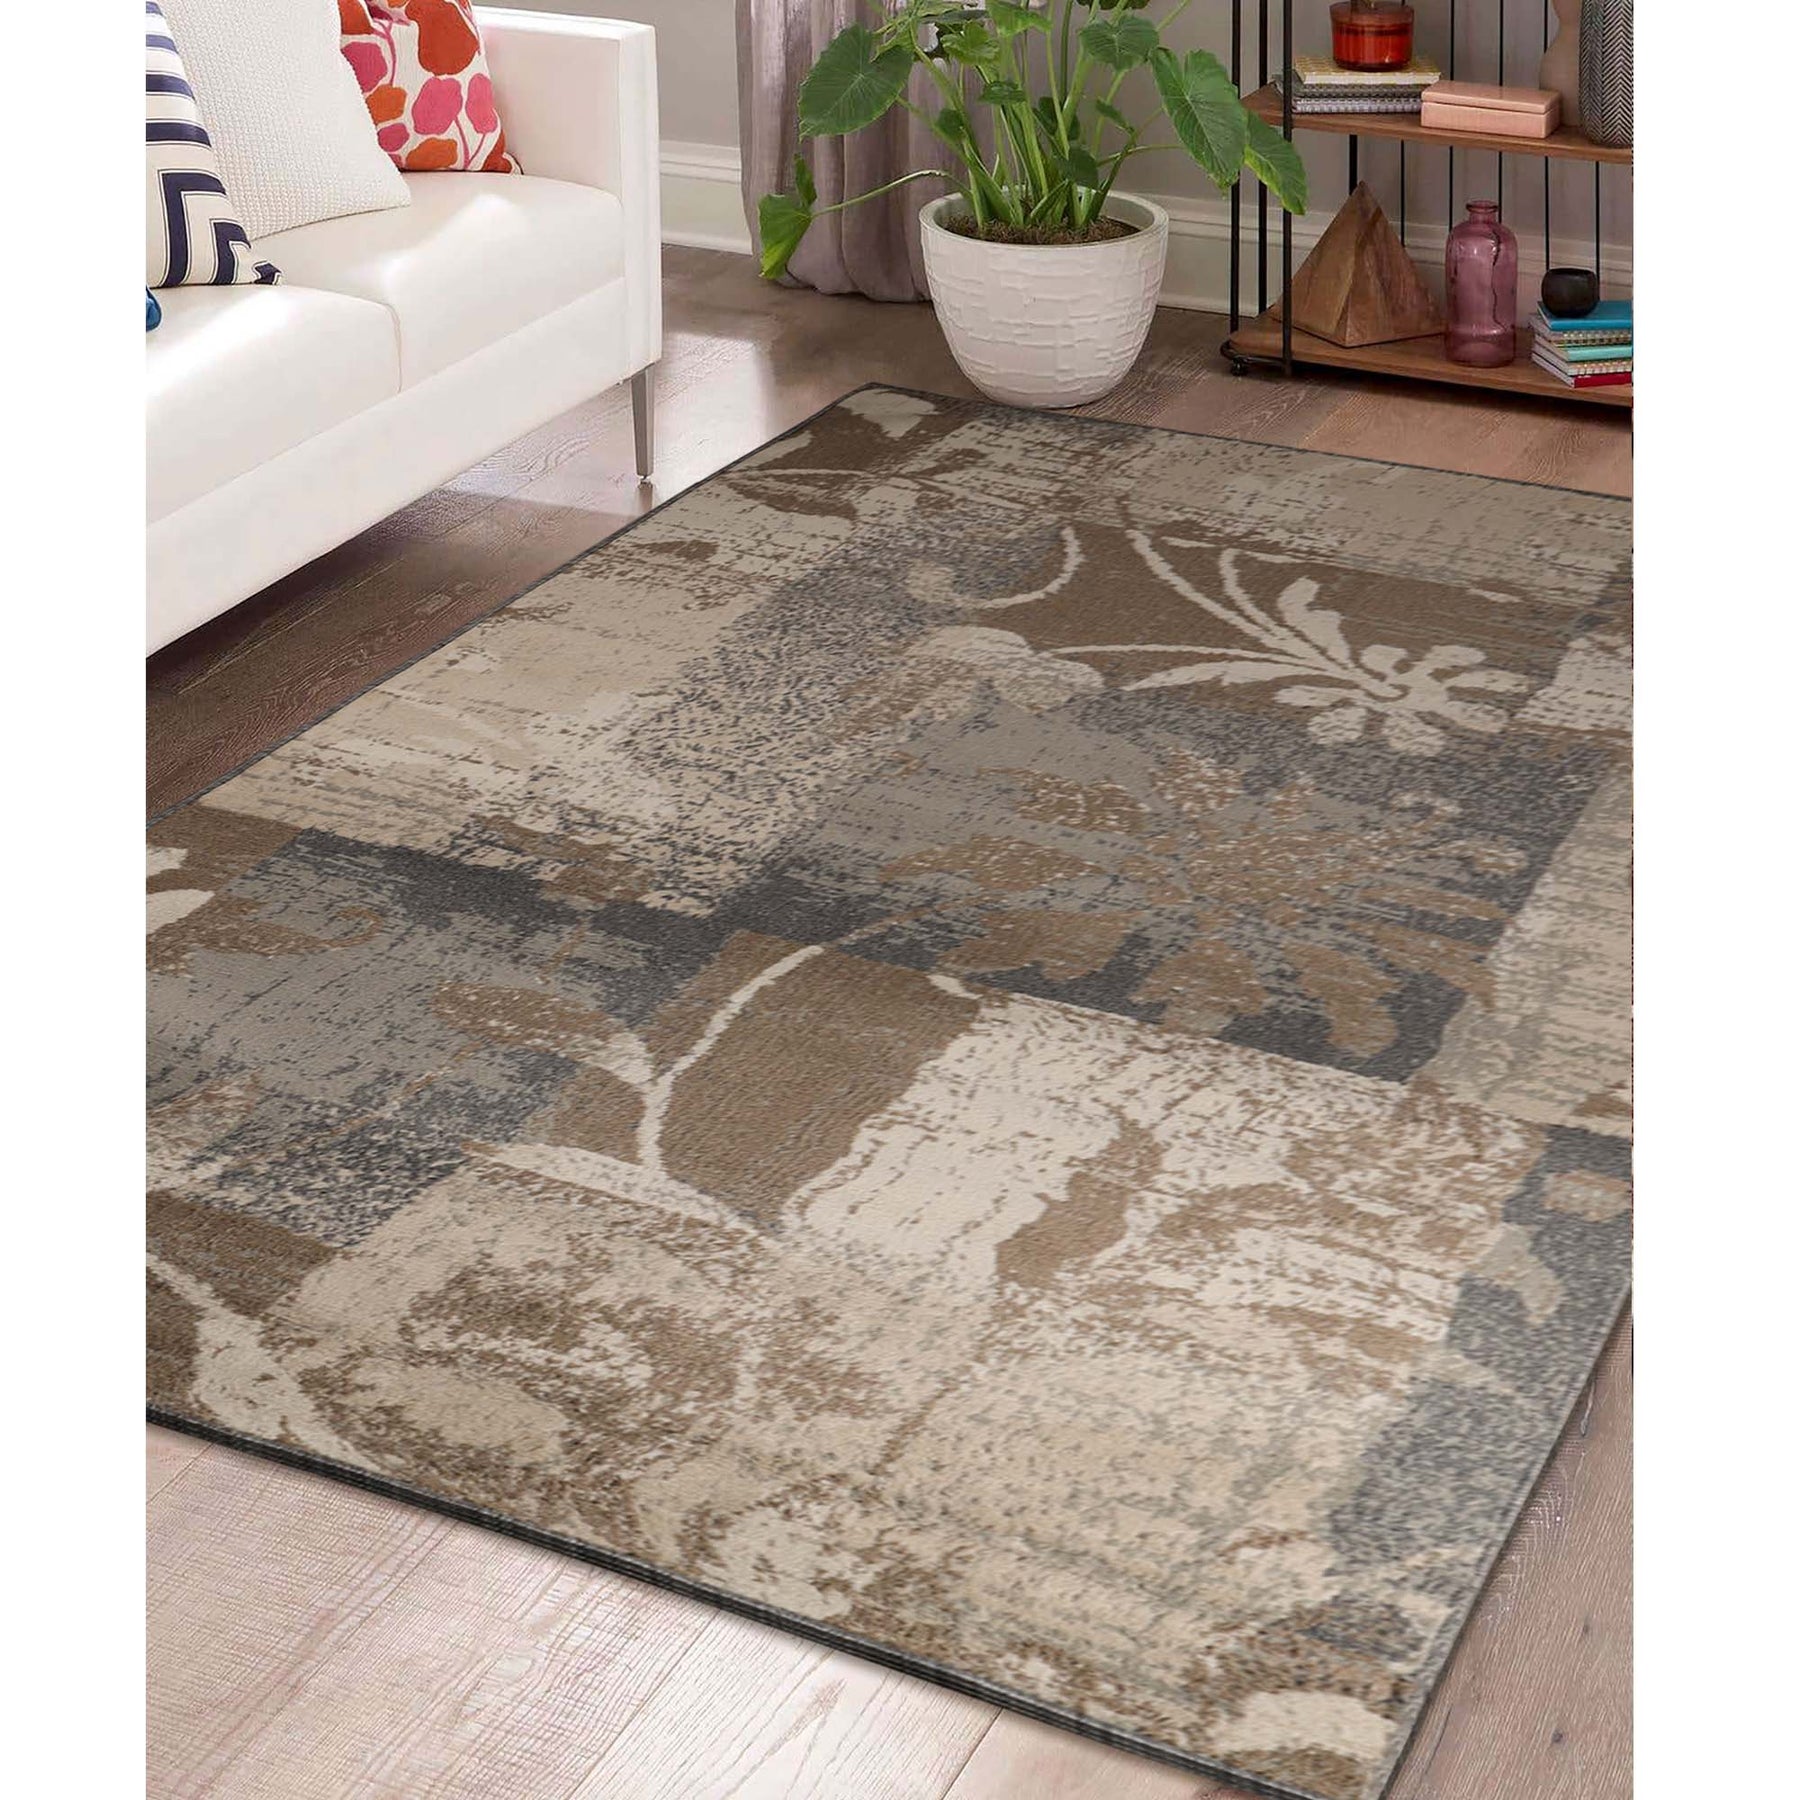 Superior Pastiche Contemporary Floral Patchwork Area Rug - Ivory